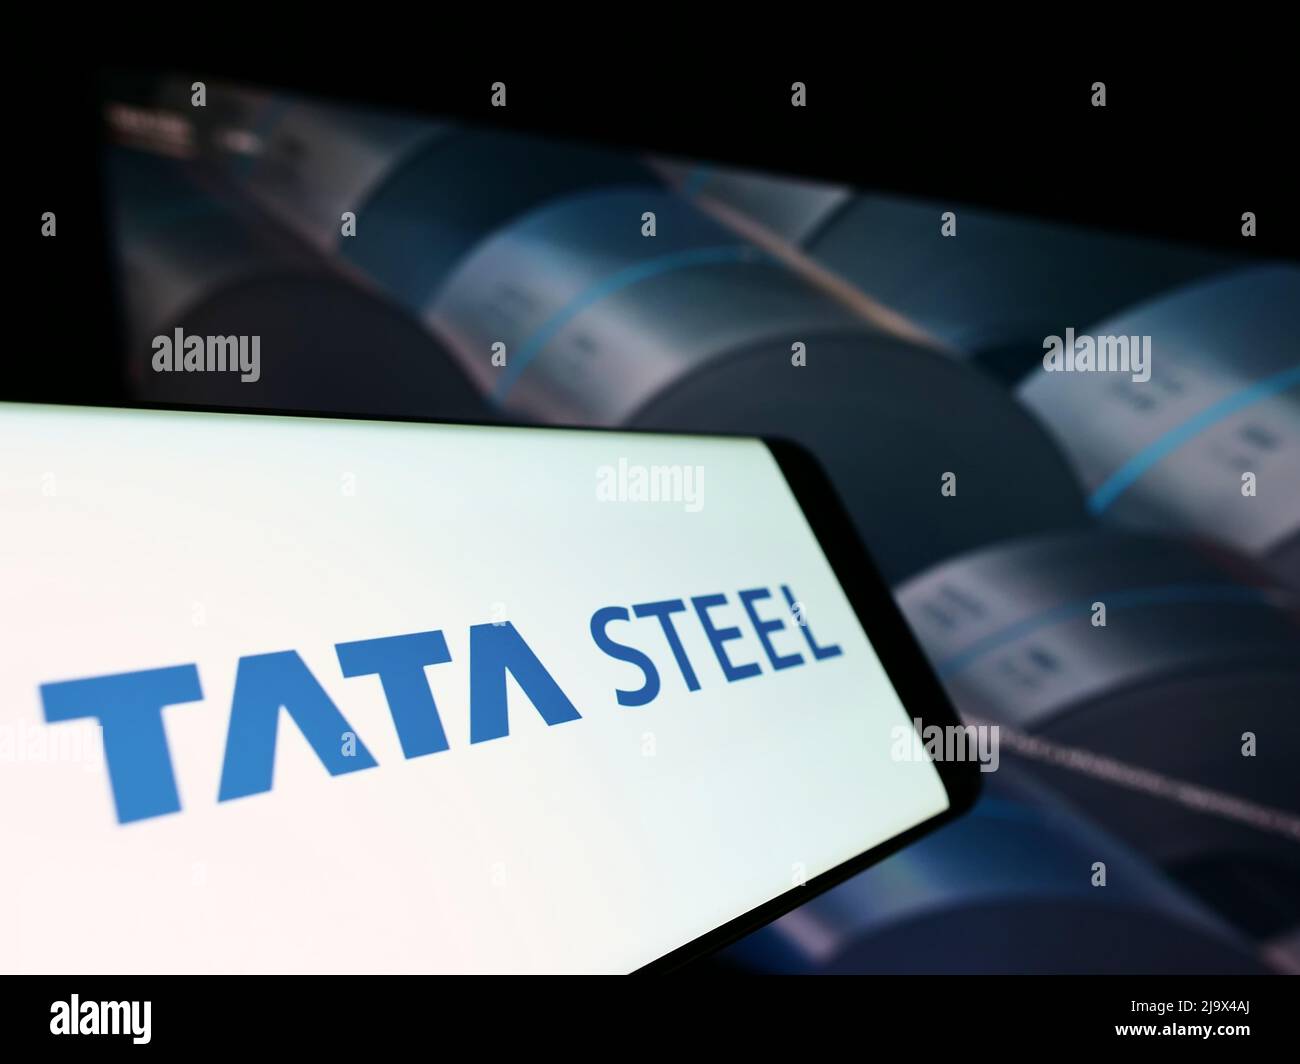 Mobile phone with logo of Indian steelmaking company Tata Steel Limited on screen in front of website. Focus on center-right of phone display. Stock Photo